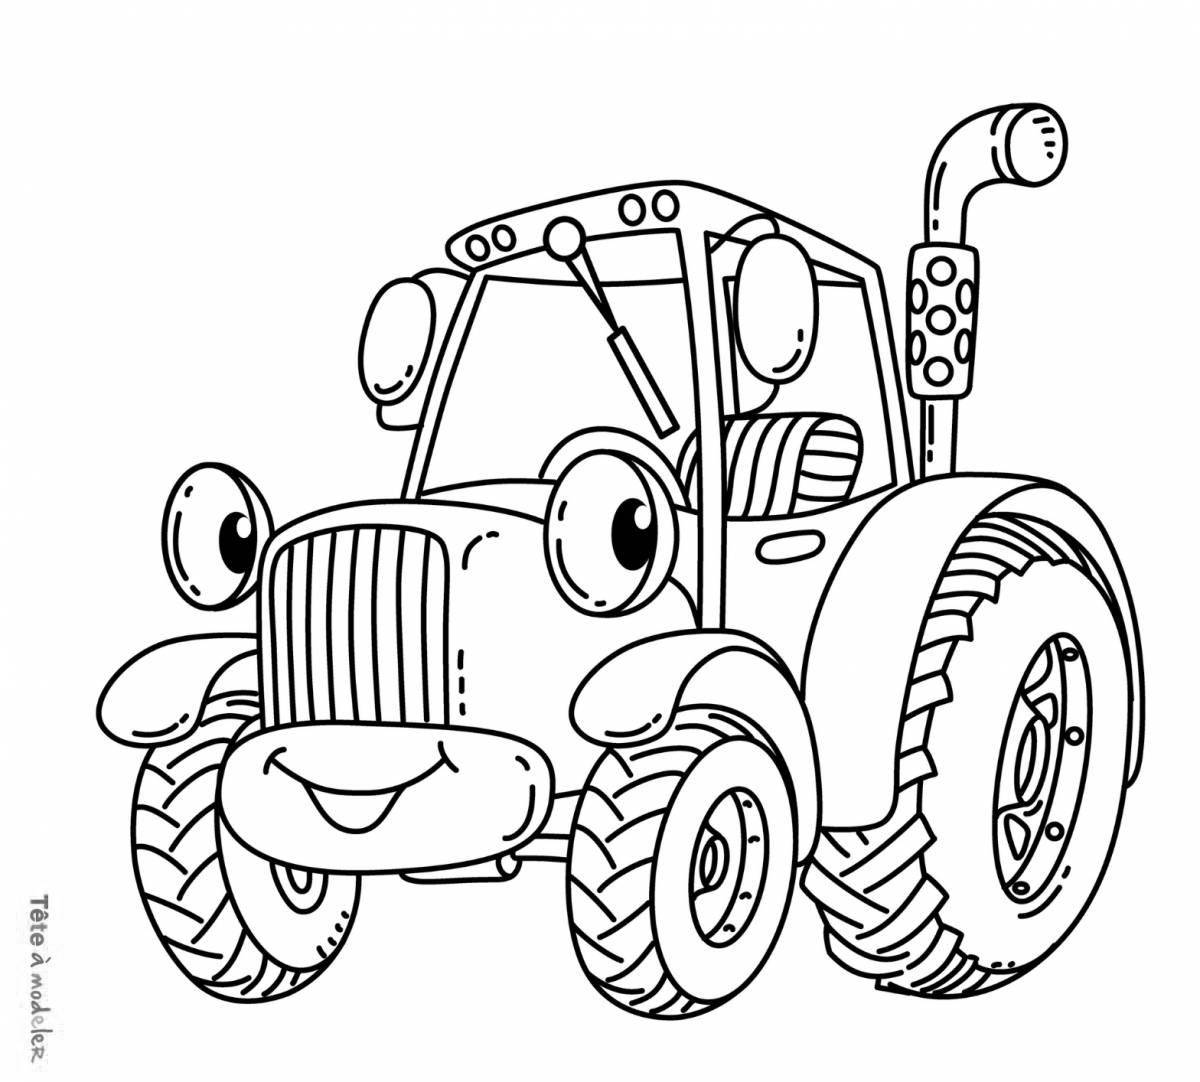 Shiny blue tractor seal coloring page